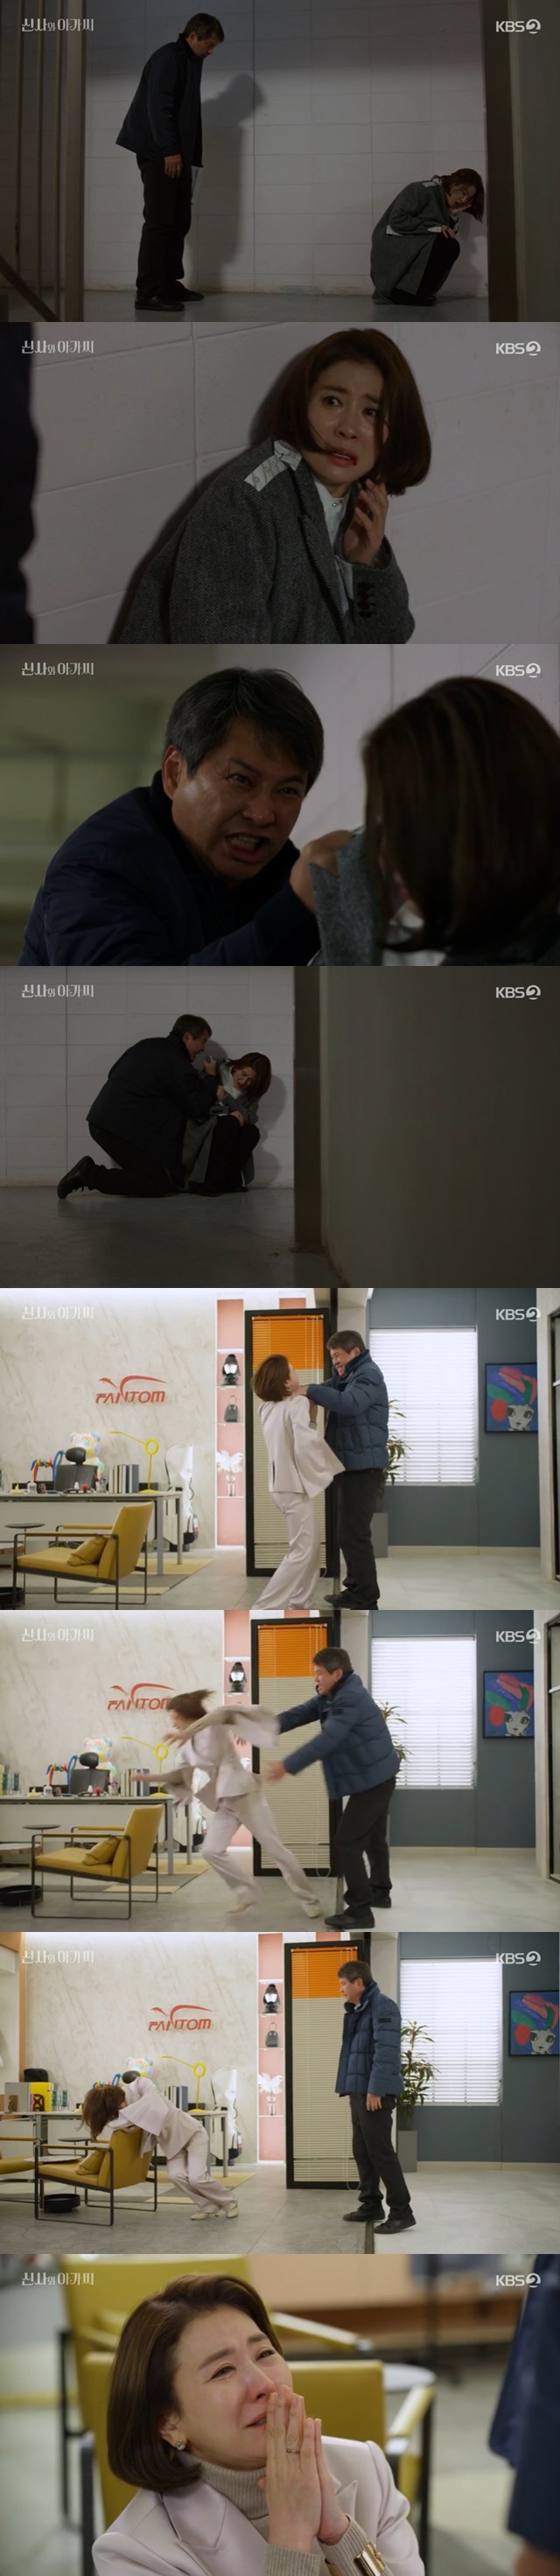 Viewers were sulking in the scene where Lee Jong-Won beat and pushed his ex-wife Lee Il-hwa, who had abandoned him and deceived him.In the 32nd episode of KBS 2TV weekend drama Shinto and Young Lady (played by Kim Sa-kyung/directed by Shin Chang-seok), which aired on January 9, Park Soo-cheol (Lee Jong-Won) was outraged to learn that Anna Kim (Lee Il-hwa) was his ex-wife Kim Ji Young.Park Su-cheol had previously suspected Anna Kims intention to scout him with United States of America, offering him up to $200,000 a year, and saw his ex-wife Kim Ji Young in two points behind Anna Kims neck, but said, My face is different.However, Park Soo-chul was deeply suspicious to confirm that Anna Kim really had a picture of her daughter, Park Dan-dan (Lee Se-hee), who was told by her wife, Cha Yeon-sil (Oh Hyun-kyung).Park Soo-cheol commissioned a genetic test with a straw used by Anna Kims toothbrush and daughter Park Dan-dan, and the results came out as mother-daughter relations.Park Su-cheol was enraged that Kim Ji Young, who had abandoned himself and his daughter Park Dan-dan and left for United States of America, changed his face and became an anarchist and Temptated himself back.Park Soo-cheol went to Ana Kim and called it Ji Young-ah, and when Ana Kim looked back, he slapped her, saying, Ji Young is right.Anna Kim fell to the floor, her lips burst and shed blood, and Park Soo-cheol said, This dog, not even a beast.And you are a man? Park Su-cheol said, I wont kill you today, but I can kill you next time.If you dont want to die, dont ever show up in front of me again, and our dandans in front of you.The next day, Anna Kim asked Park Soo-cheol to meet him to explain, and sent a text message saying that he would go to the chicken house if he did not meet.Park Soo-cheol went to the officetel and pushed Anna Kim into the chair, and Anna Kim fell to his knees.Anna Kim said she did not have plastic surgery on purpose, but she was almost killed in a car accident at United States of America and had undergone more than 10 surgeries.In the past, Kim Ji Young left her husband Park Soo-cheol and daughter Park Dan-dan to United States of America, and Park Soo-cheol was a single woman who tried to throw away her life because she could not put her daughter Park Dan-dan on her family register.Cha Yeon-sil saved Park Soo-cheol, saying, I will be Dandans mother. After that, Park Soo-chul lived a difficult life by flying his house twice because of Cha Yeon-sil and Cha Yeon-sils brother Cha Gun (Kang Eun-tak) and Cha Yeon-sils son Park Dae-beom (Ahn Woo-yeon).Then Park Soo-cheol reunited with Anna Kim as a driver of Lee Young-guk, and Anna Kim became greedy when she knew the difficult situation of Park Soo-cheol Park Dan-dan and hid her identity.Anna Kim wanted to get the two back, so she spent the night together with Park Soo-cheol, and Park Soo-cheol was aware that Anna Kim was her ex-wife Kim Ji Young after taking charge of the stomach cancer surgery.